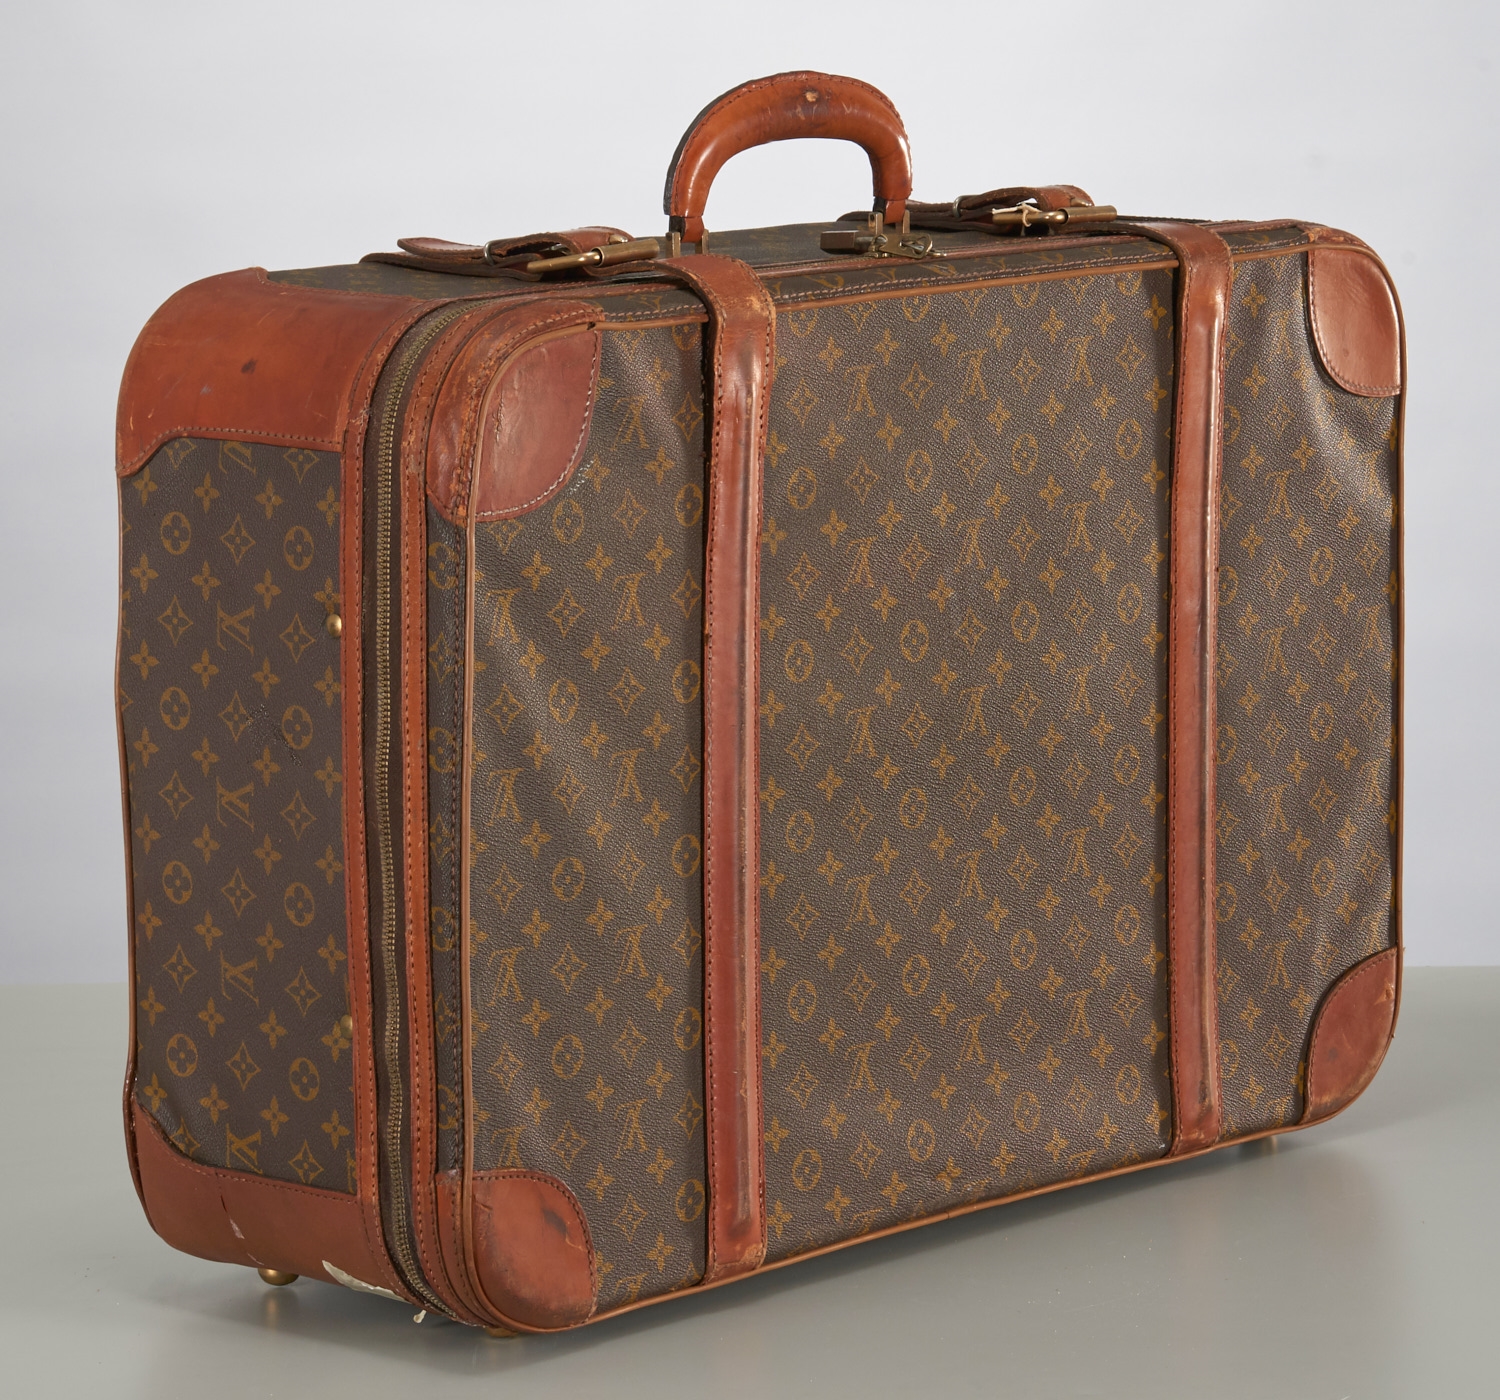 Louis Vuitton, Dimensions: (Suitcase) H 17 x W 25 Condition: Vintage wear  consistent with age and use. Wear to leather piping. Some thread loss to  straps. Some scratches and scuffs.